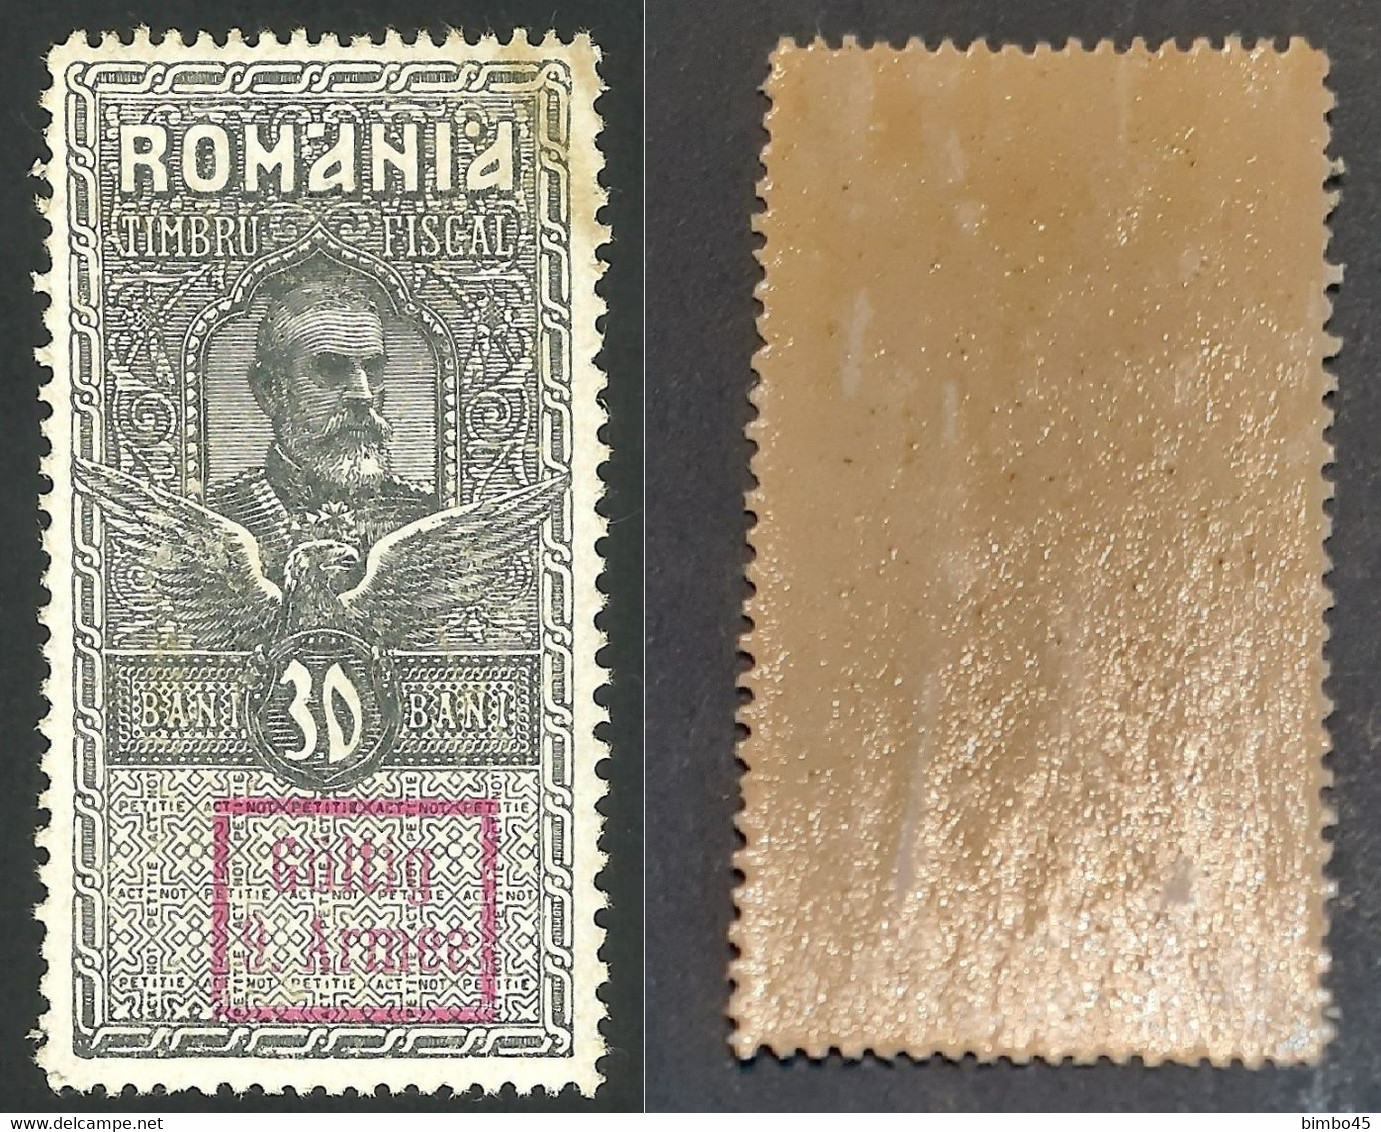 Romania 1917  MNH -- Revenue Stamp / German Occupation / Gultig 9 Armee - Fiscales